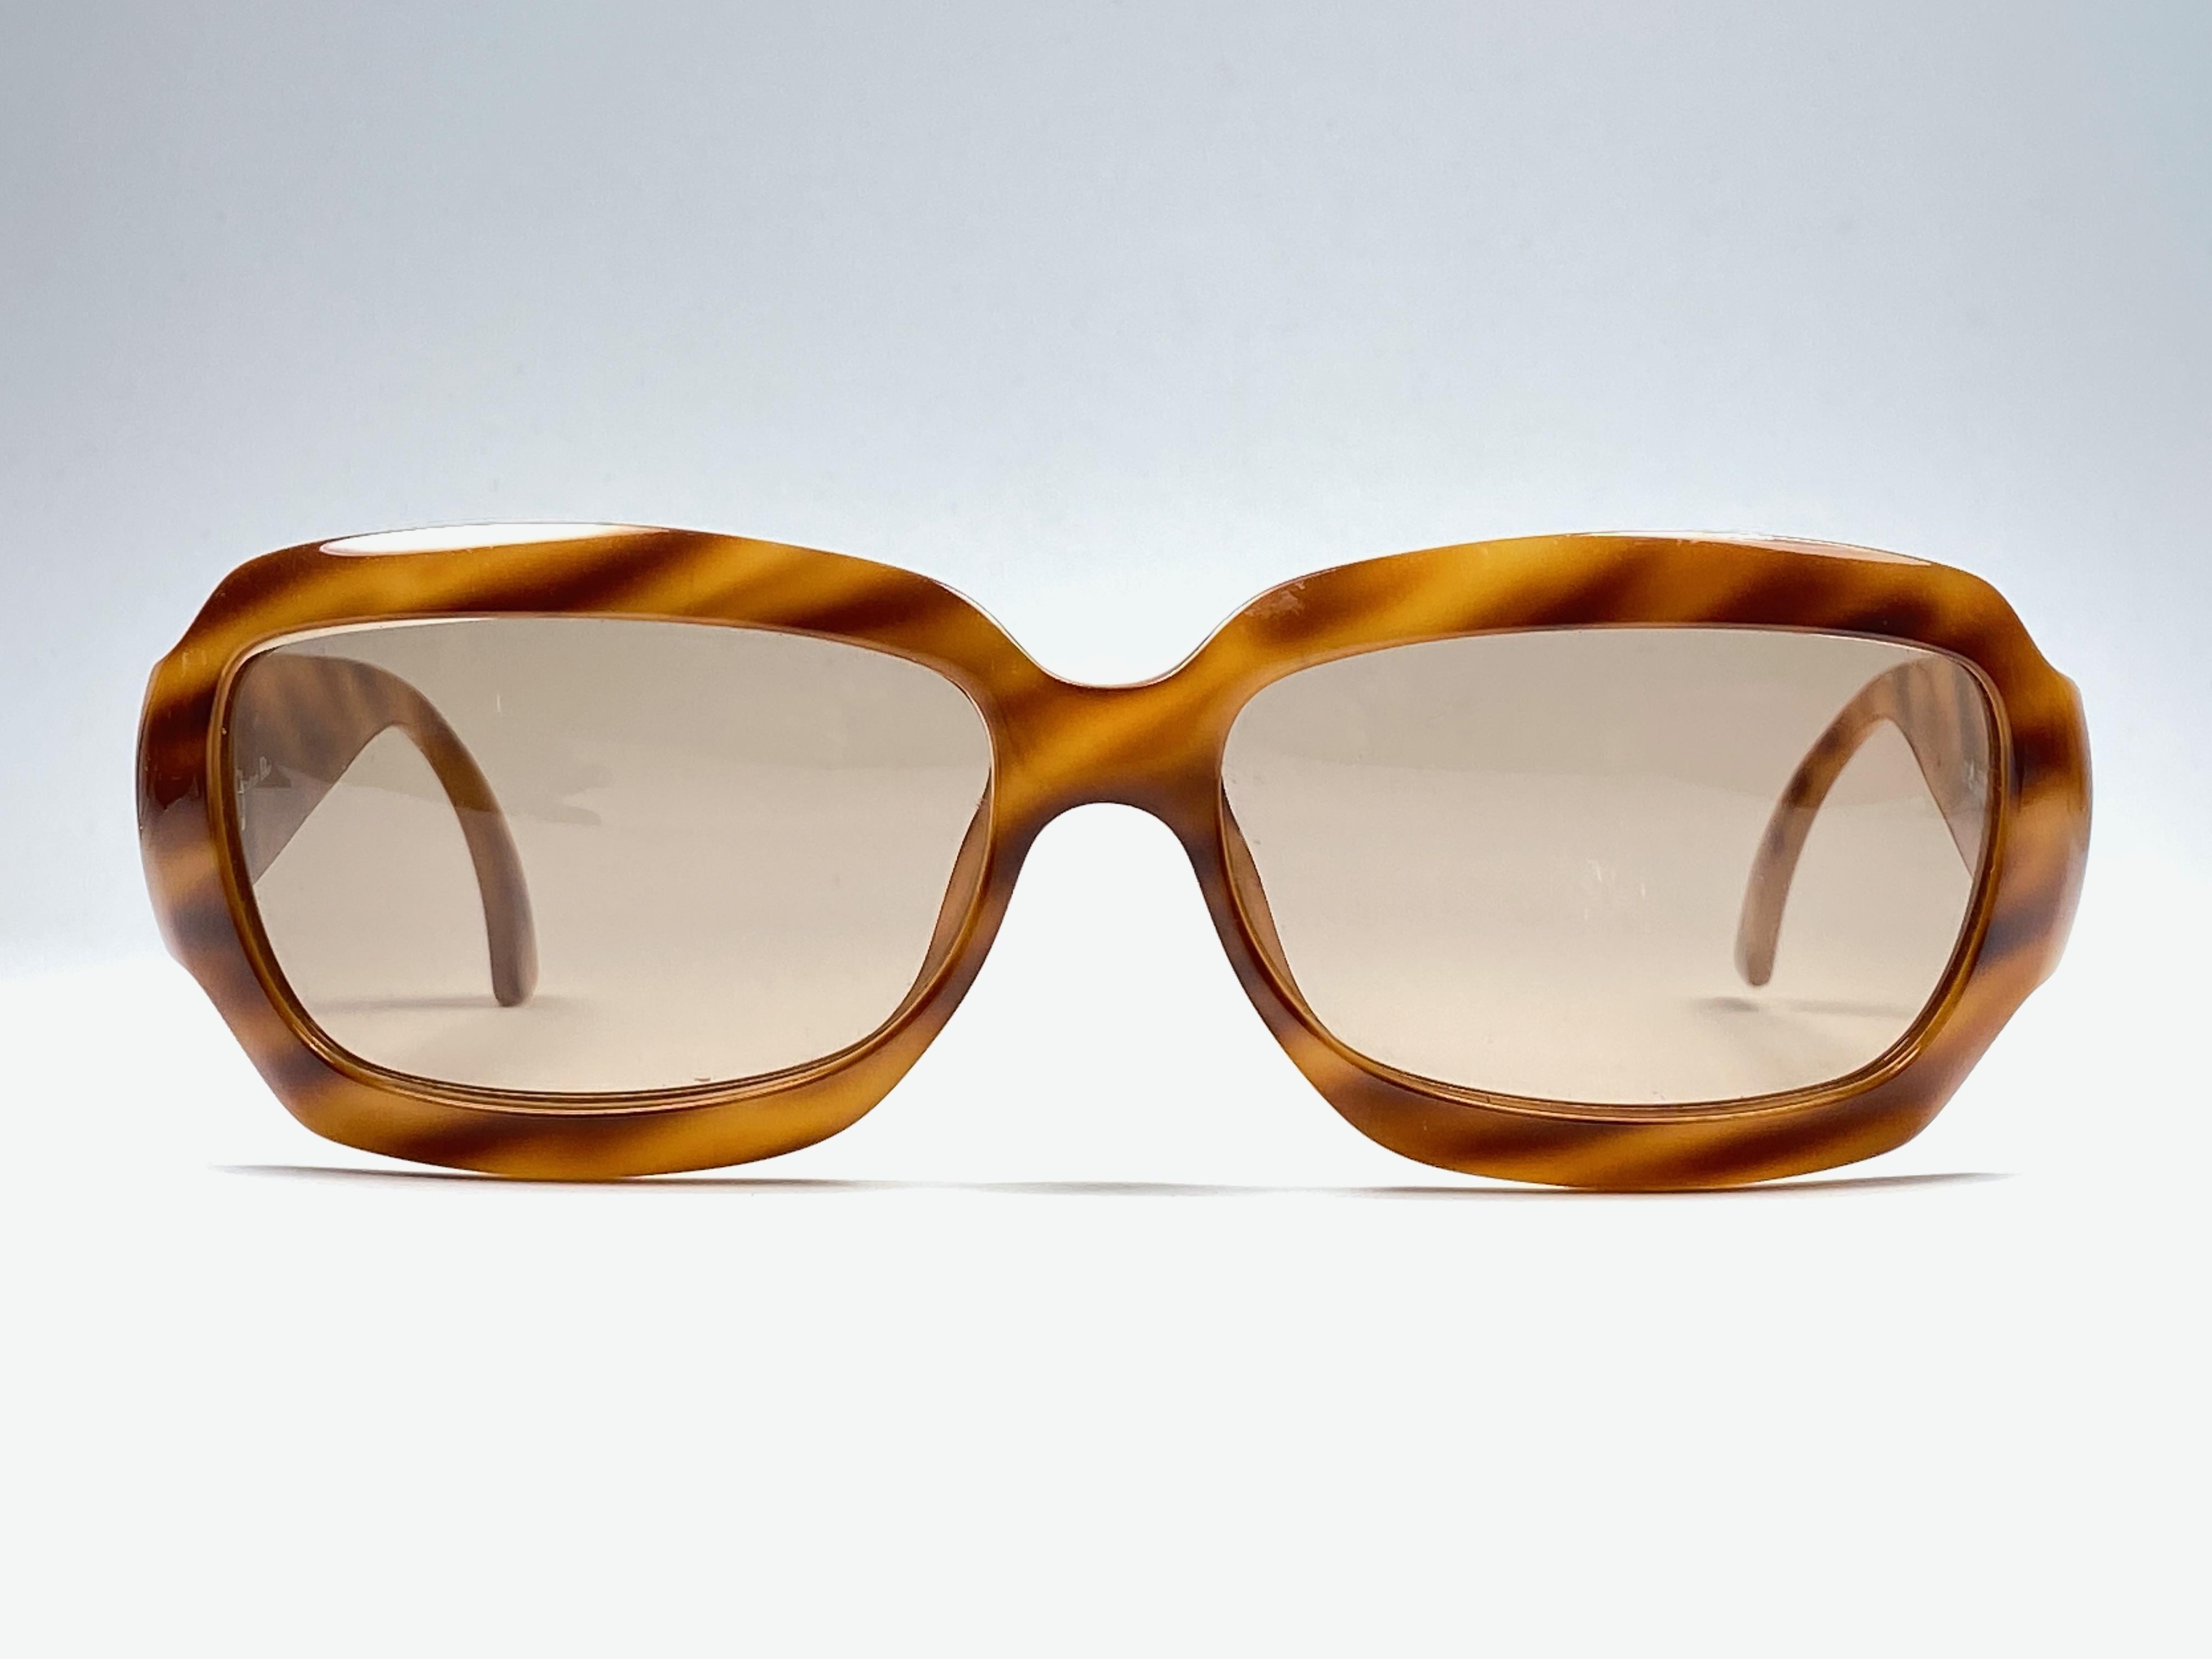 New vintage Christian Dior amber & gold sunglasses. .

Spotless brown lenses.
New, never worn or displayed this item may show light sign of wear due to storage.

Made in Austria

MEASUREMENTS

FRONT : 14 CMS

LENS HEIGHT : 3.5 CMS

LENS WIDTH : 6